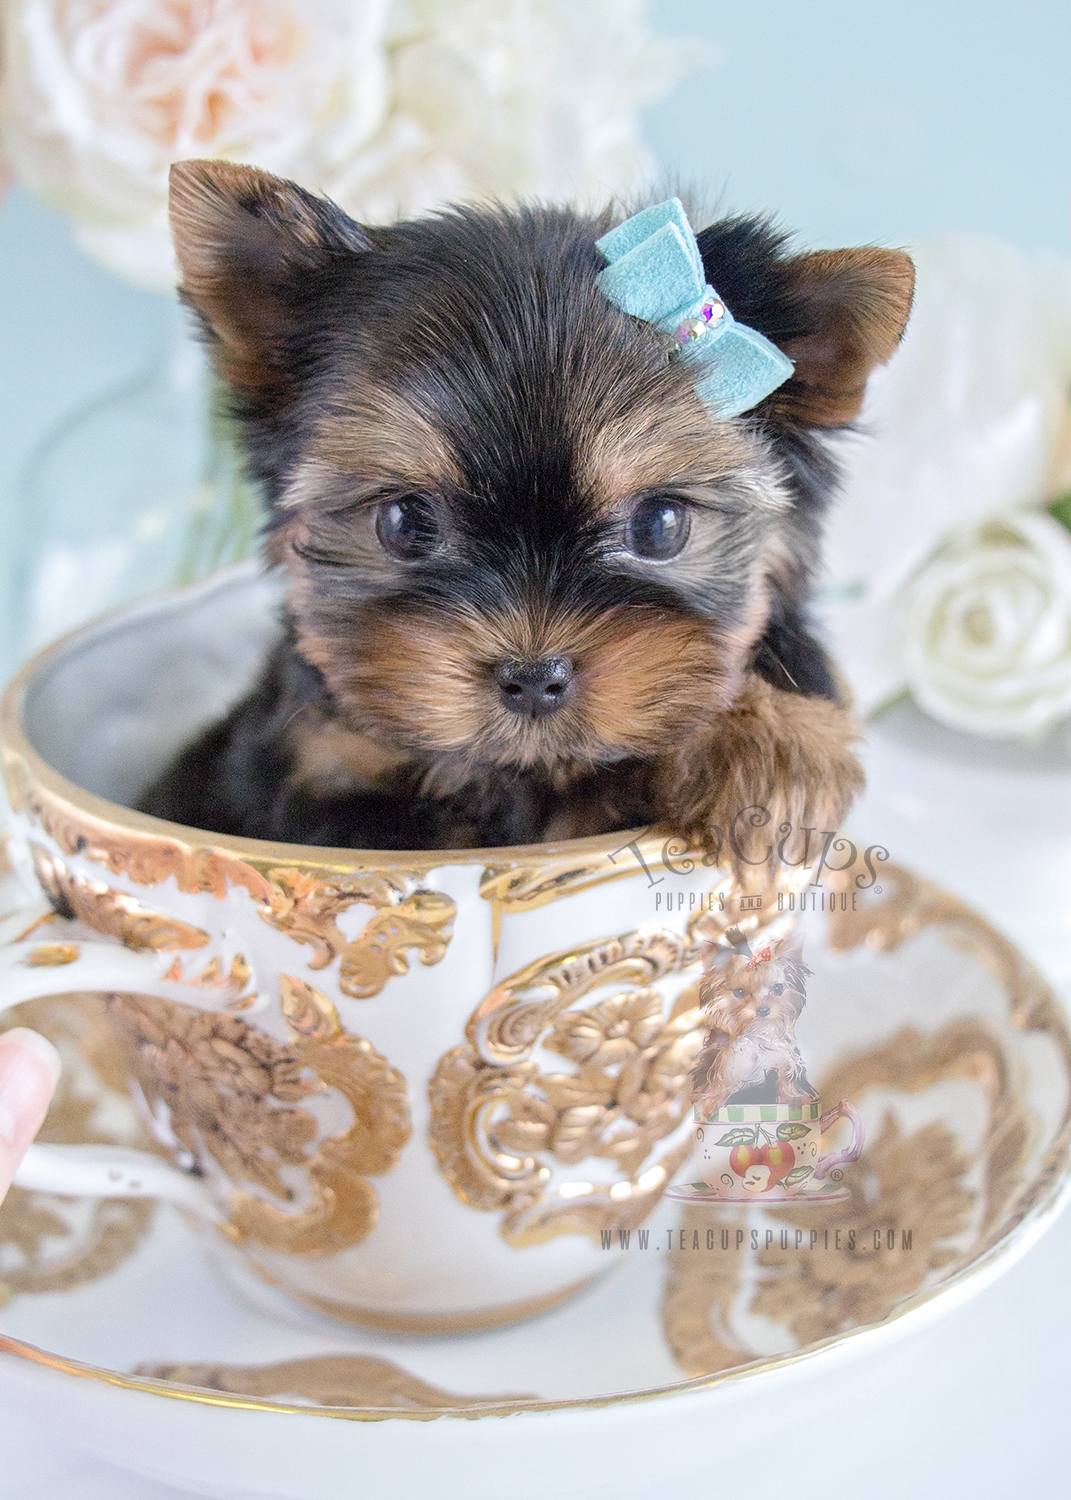 Cute Yorkie Puppy For Sale in Broward | Teacup Puppies & Boutique